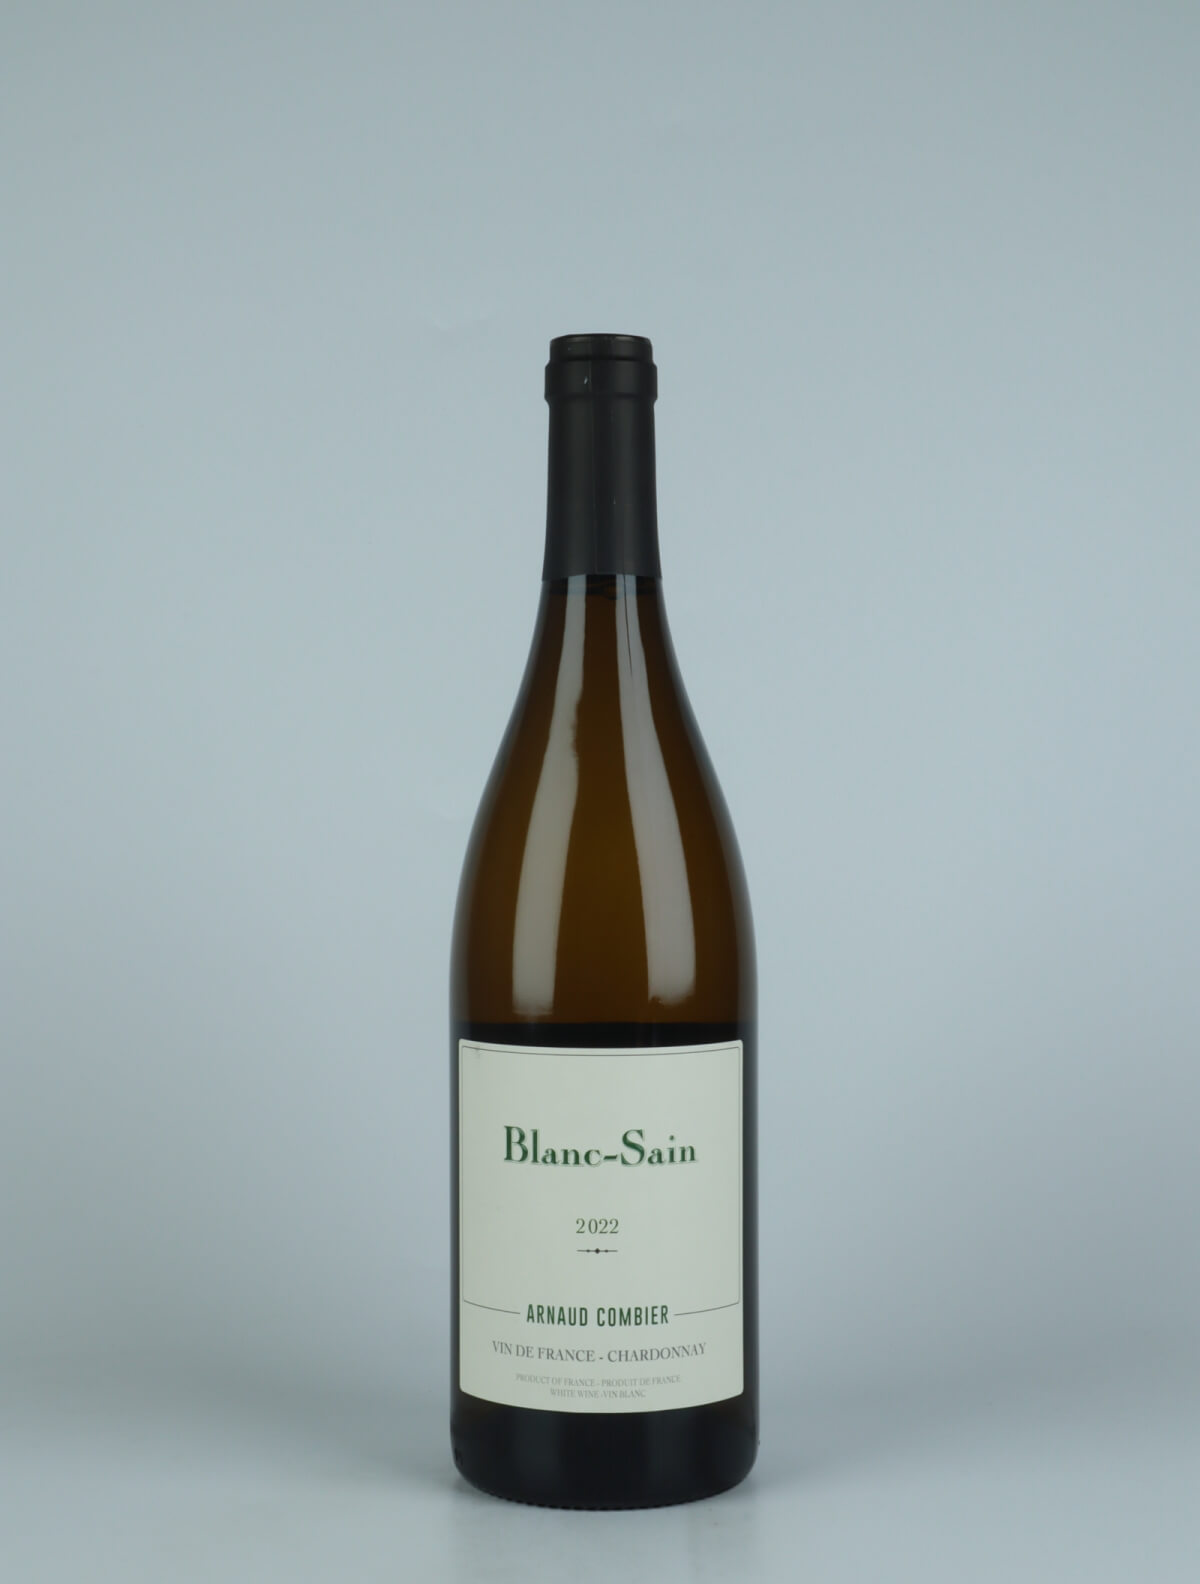 A bottle 2022 Blanc-Sain White wine from Arnaud Combier, Beaujolais in France